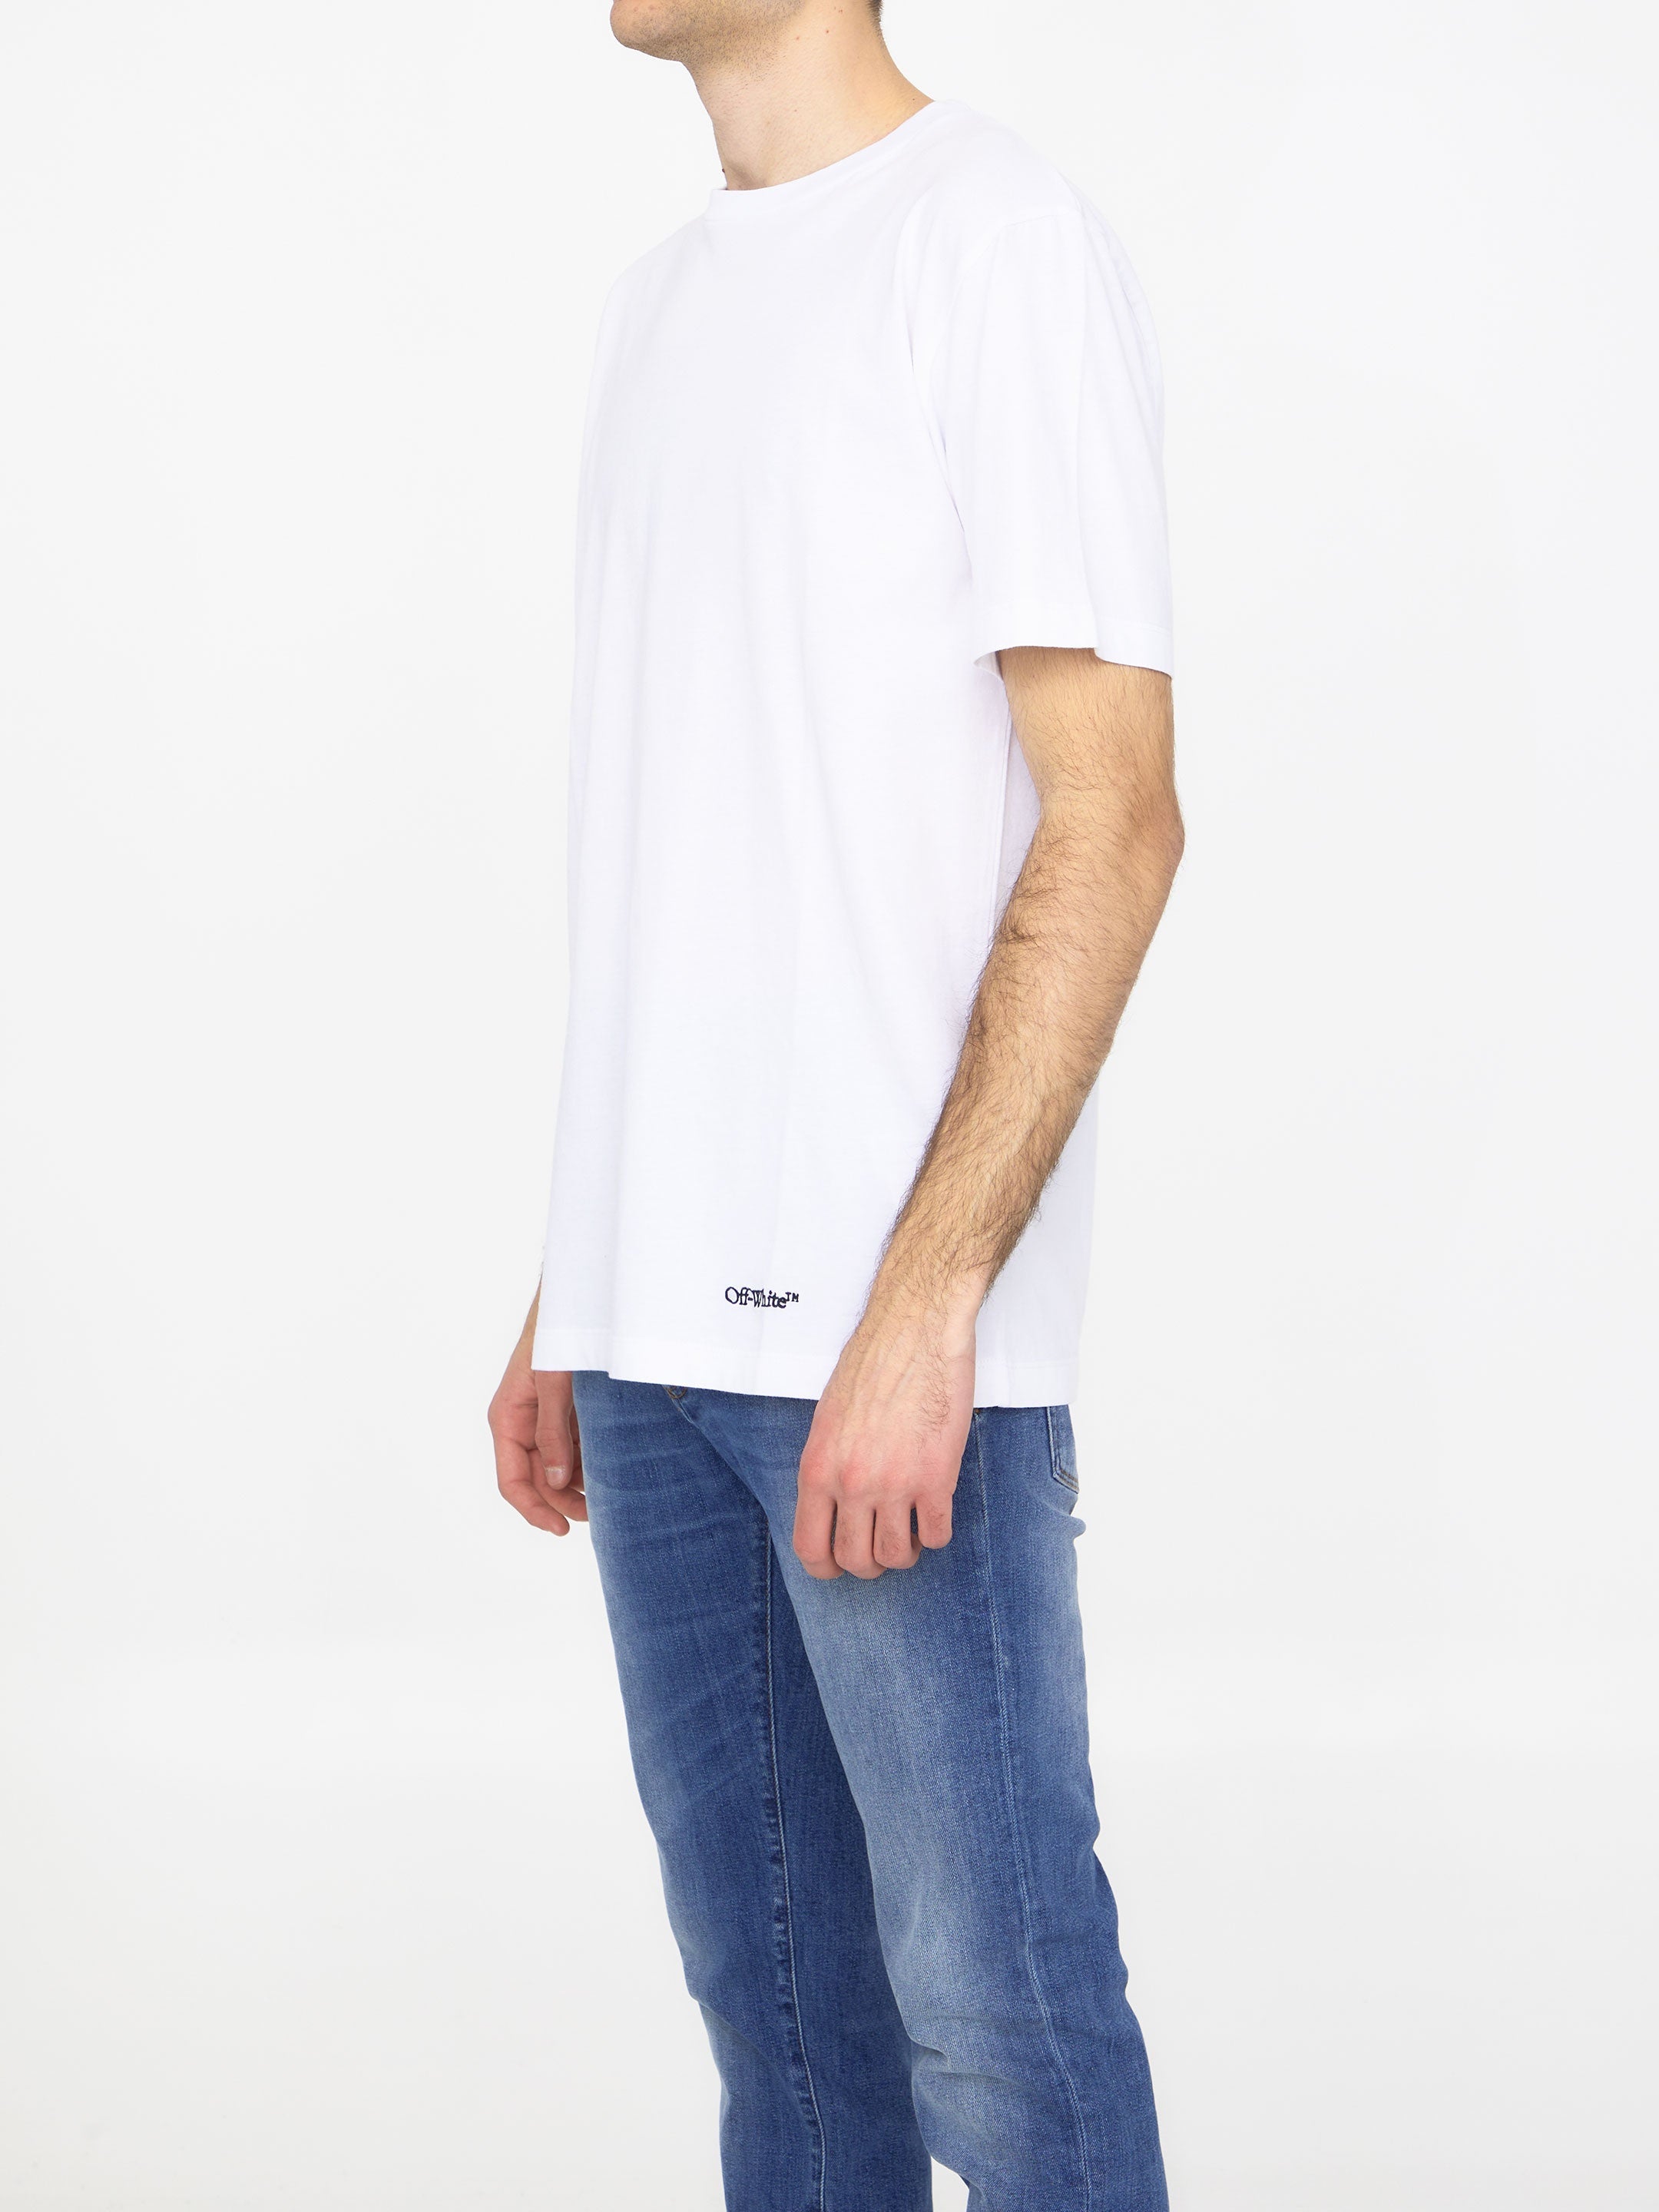 OFF-WHITE-OUTLET-SALE-Scribble-Diagonal-t-shirt-Shirts-S-WHITE-ARCHIVE-COLLECTION-2.jpg